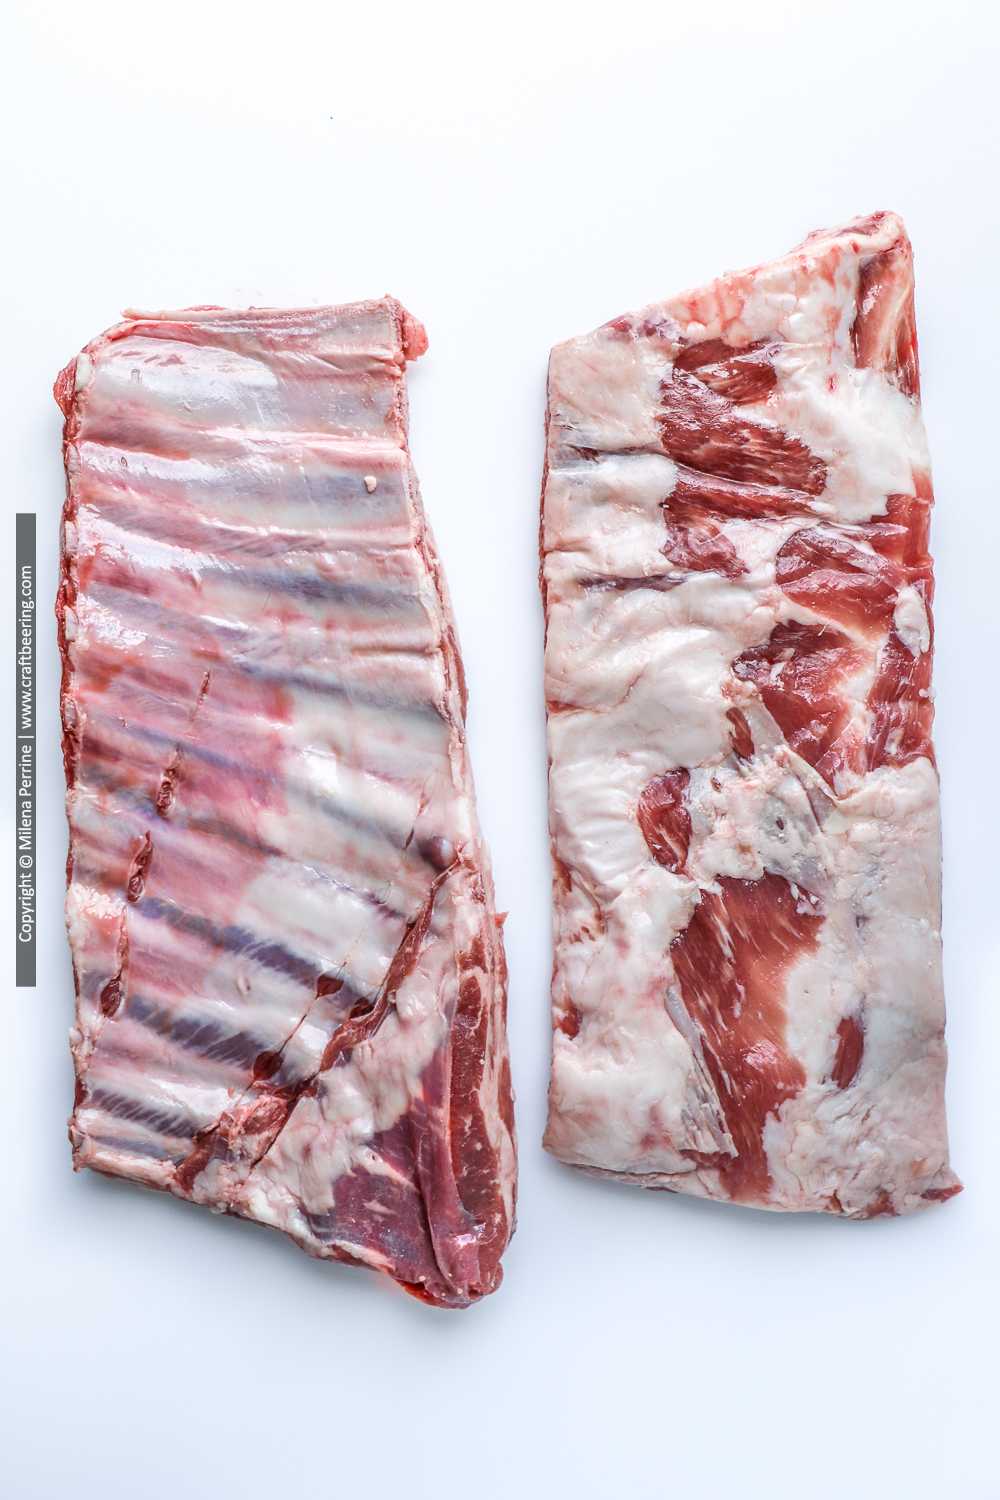 Raw racks of lamb ribs side by side - top and bottom.